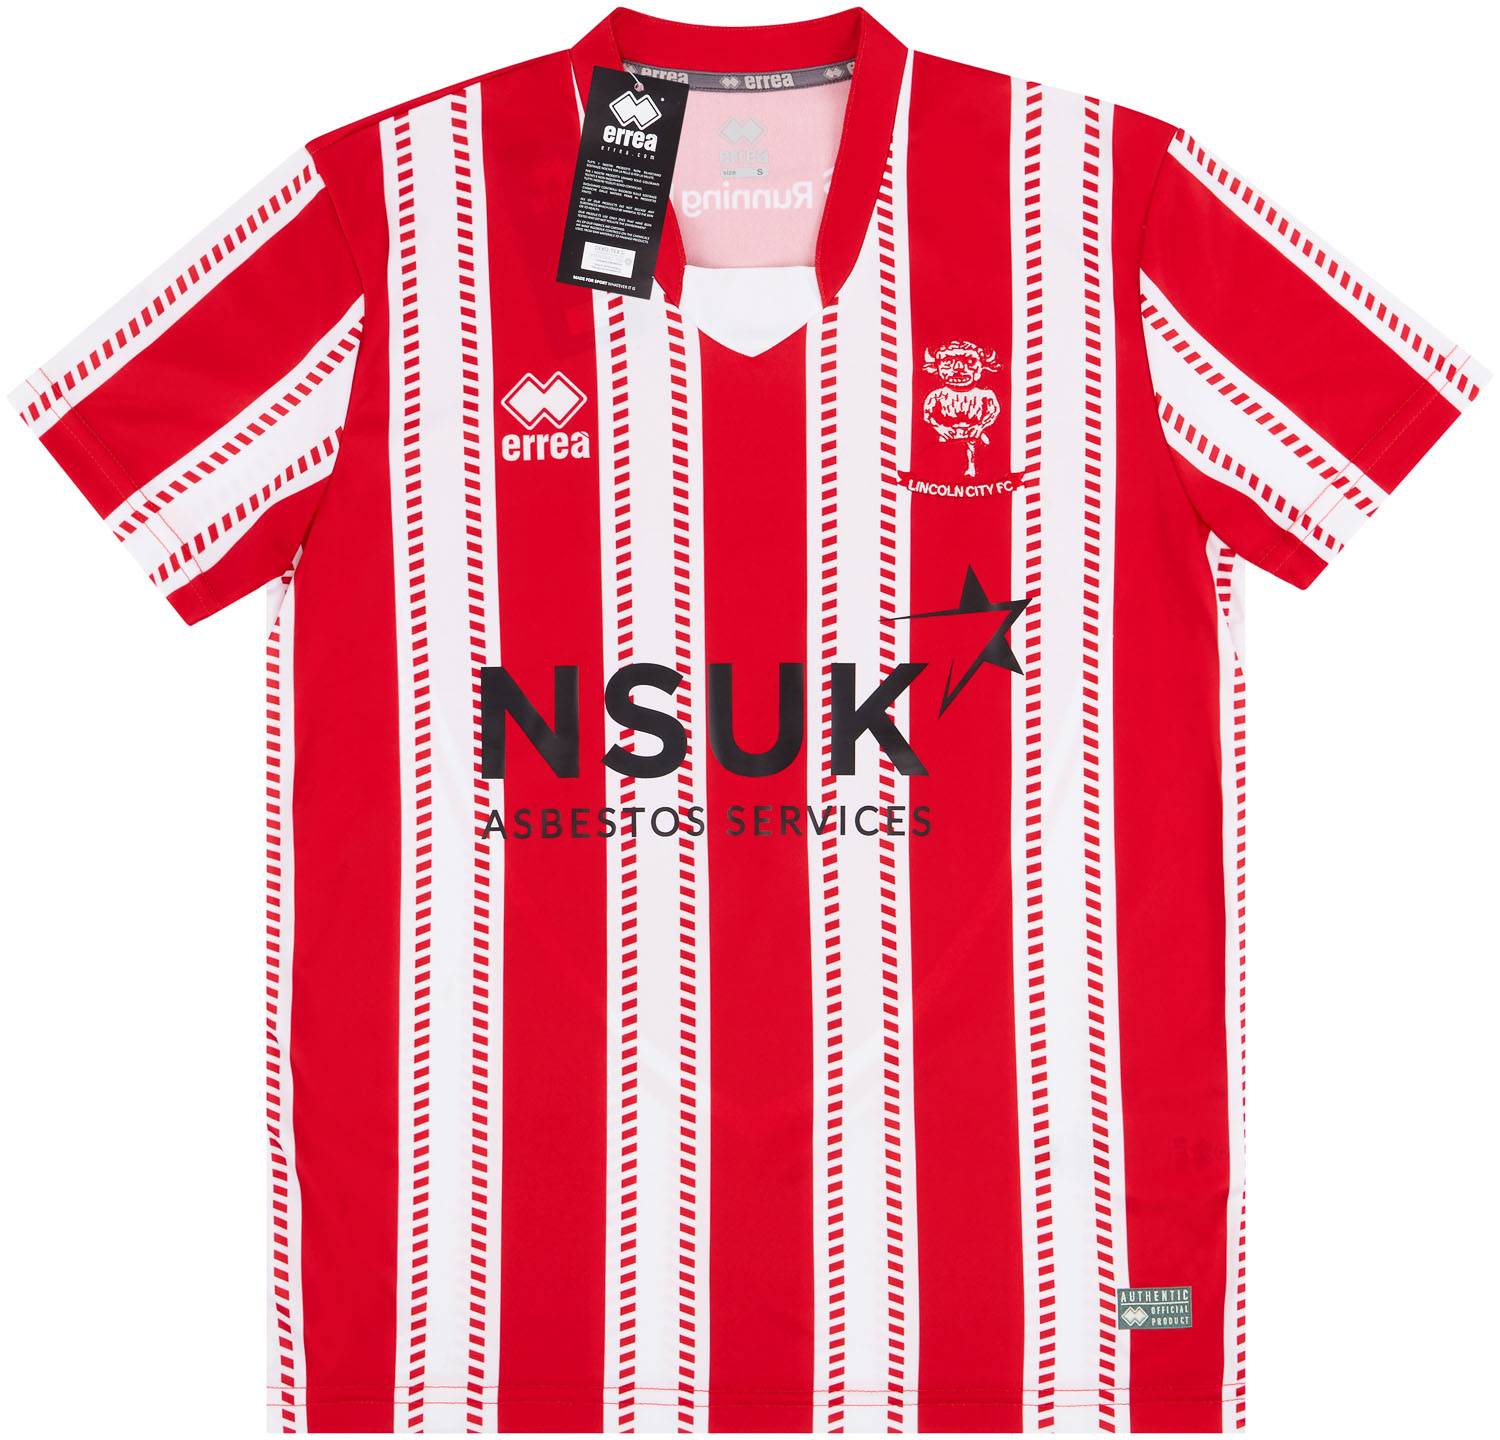 2018-19 Lincoln City Home Shirt (S)